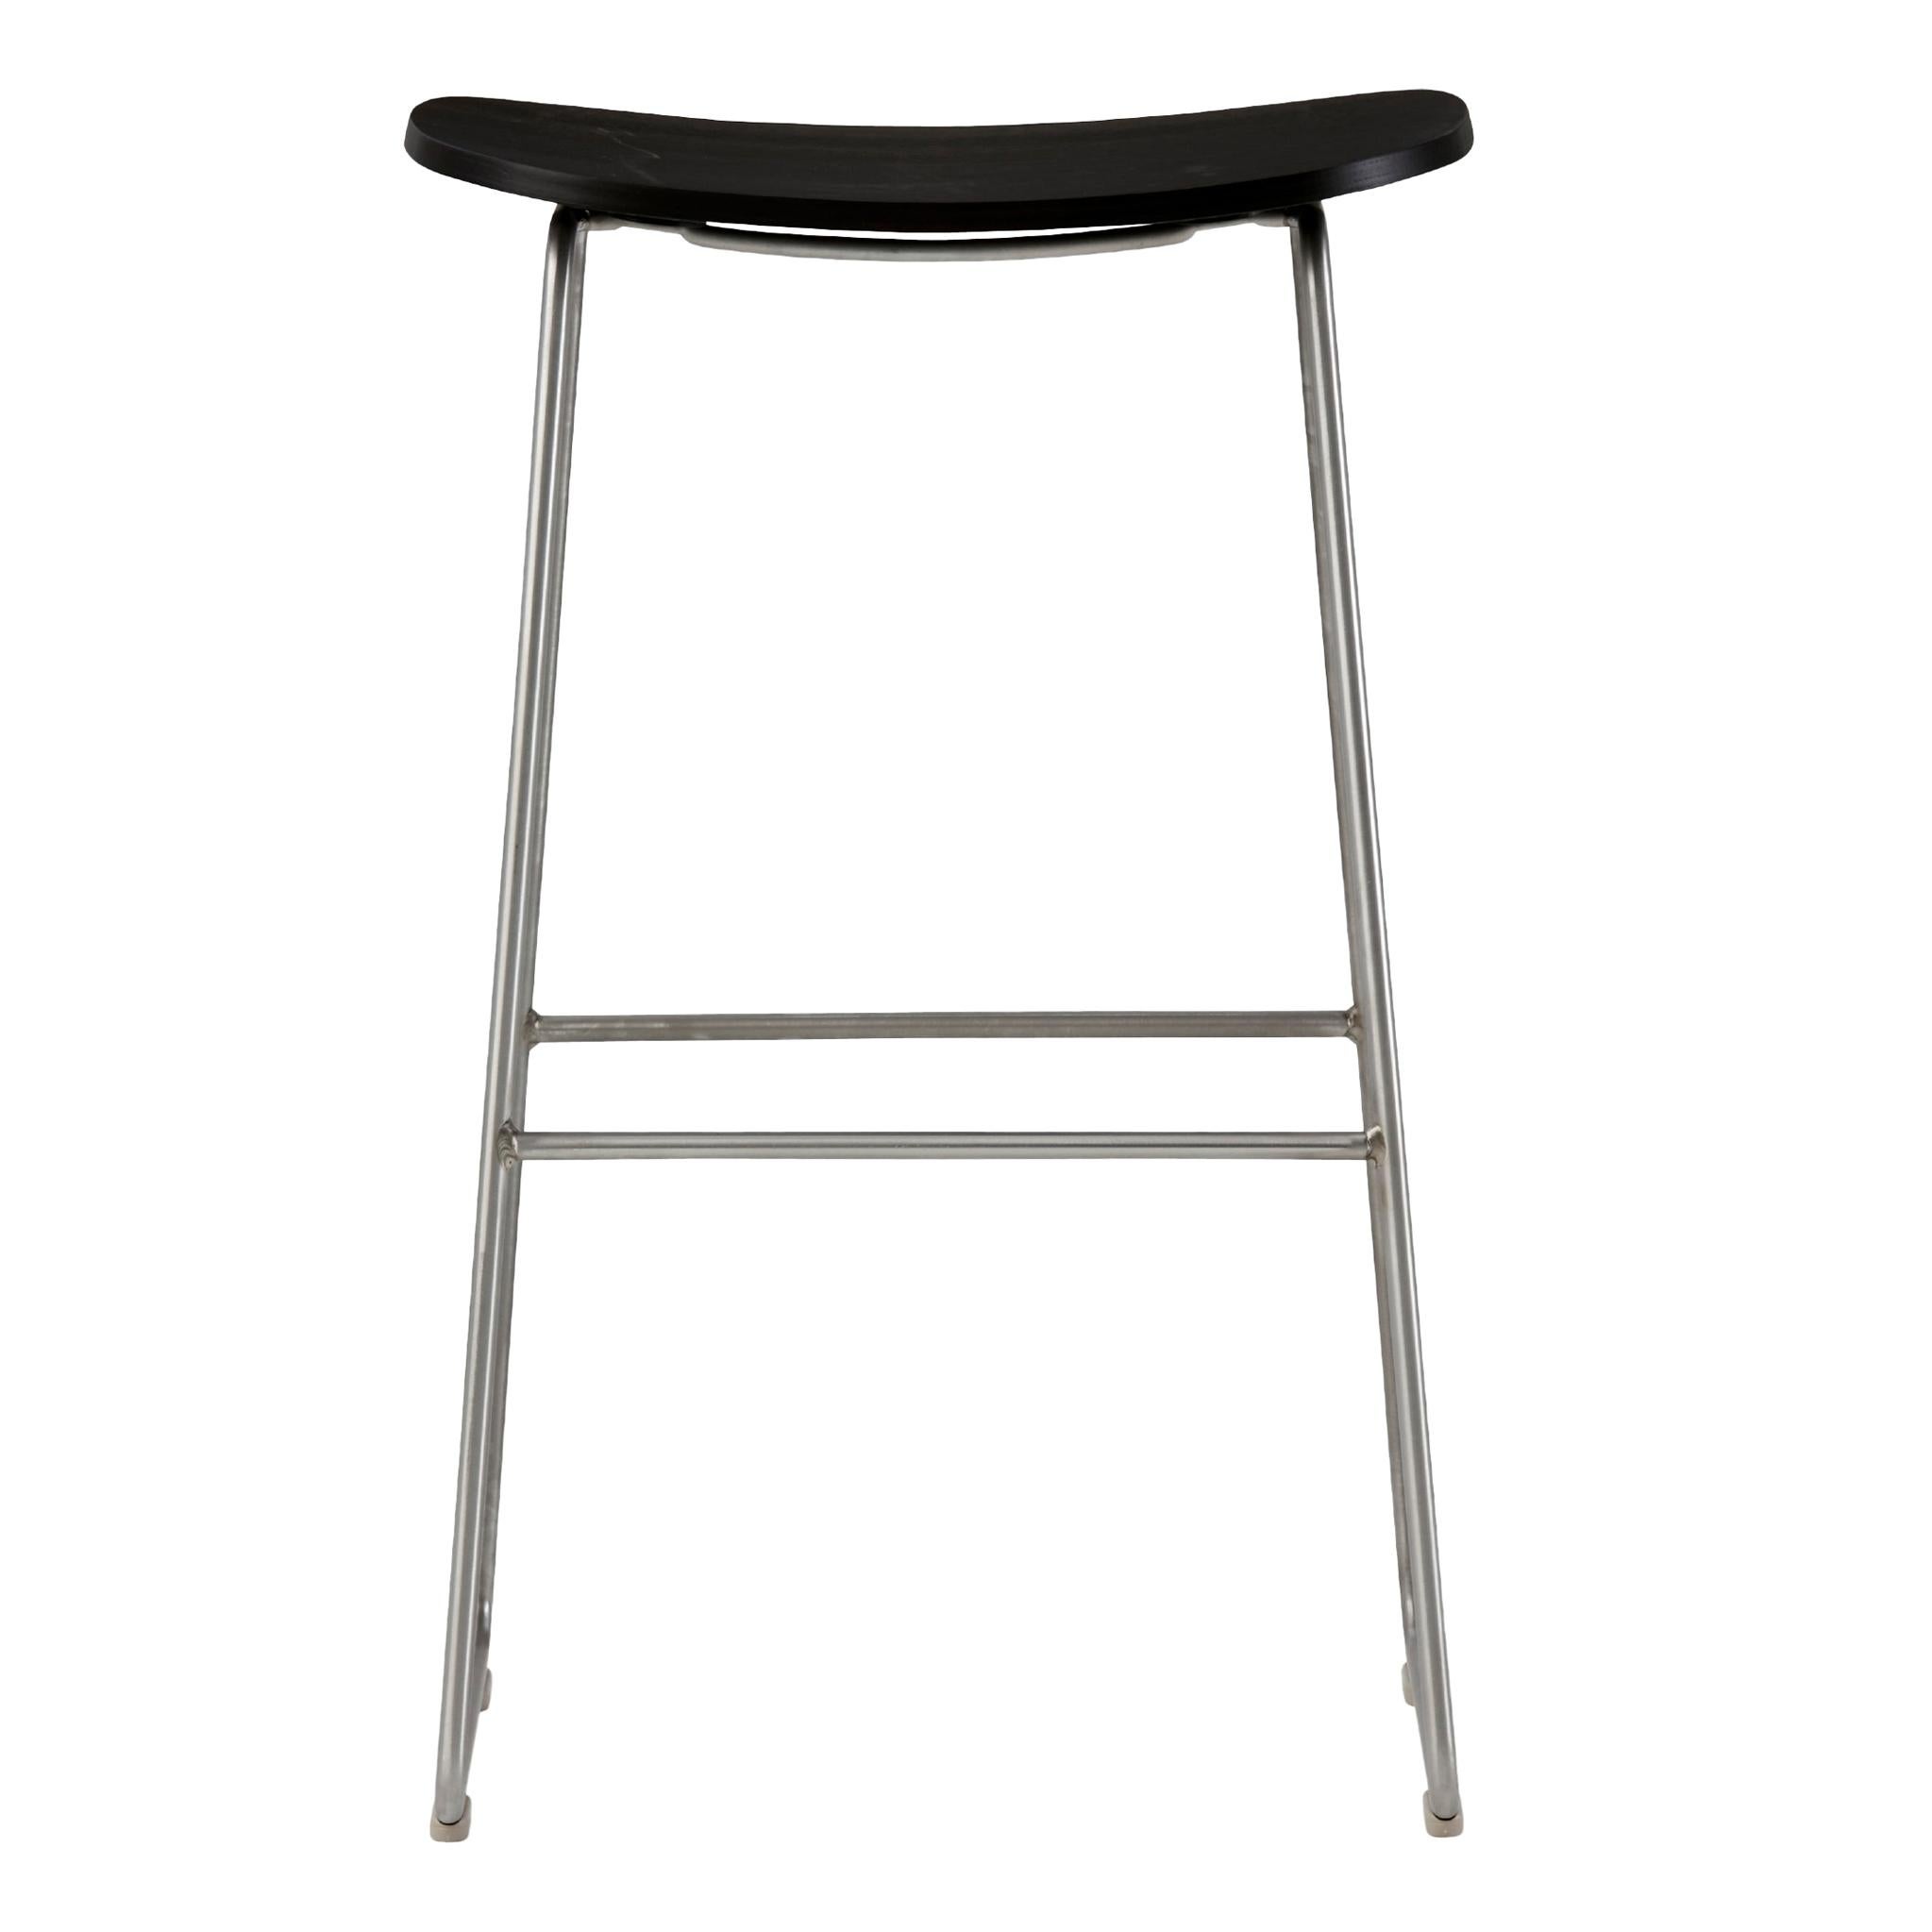 For Sale: Black (112_Black Stained Ash) Jasper Morrison Medium Morrison Stool in Ash and Fabric or Leather for